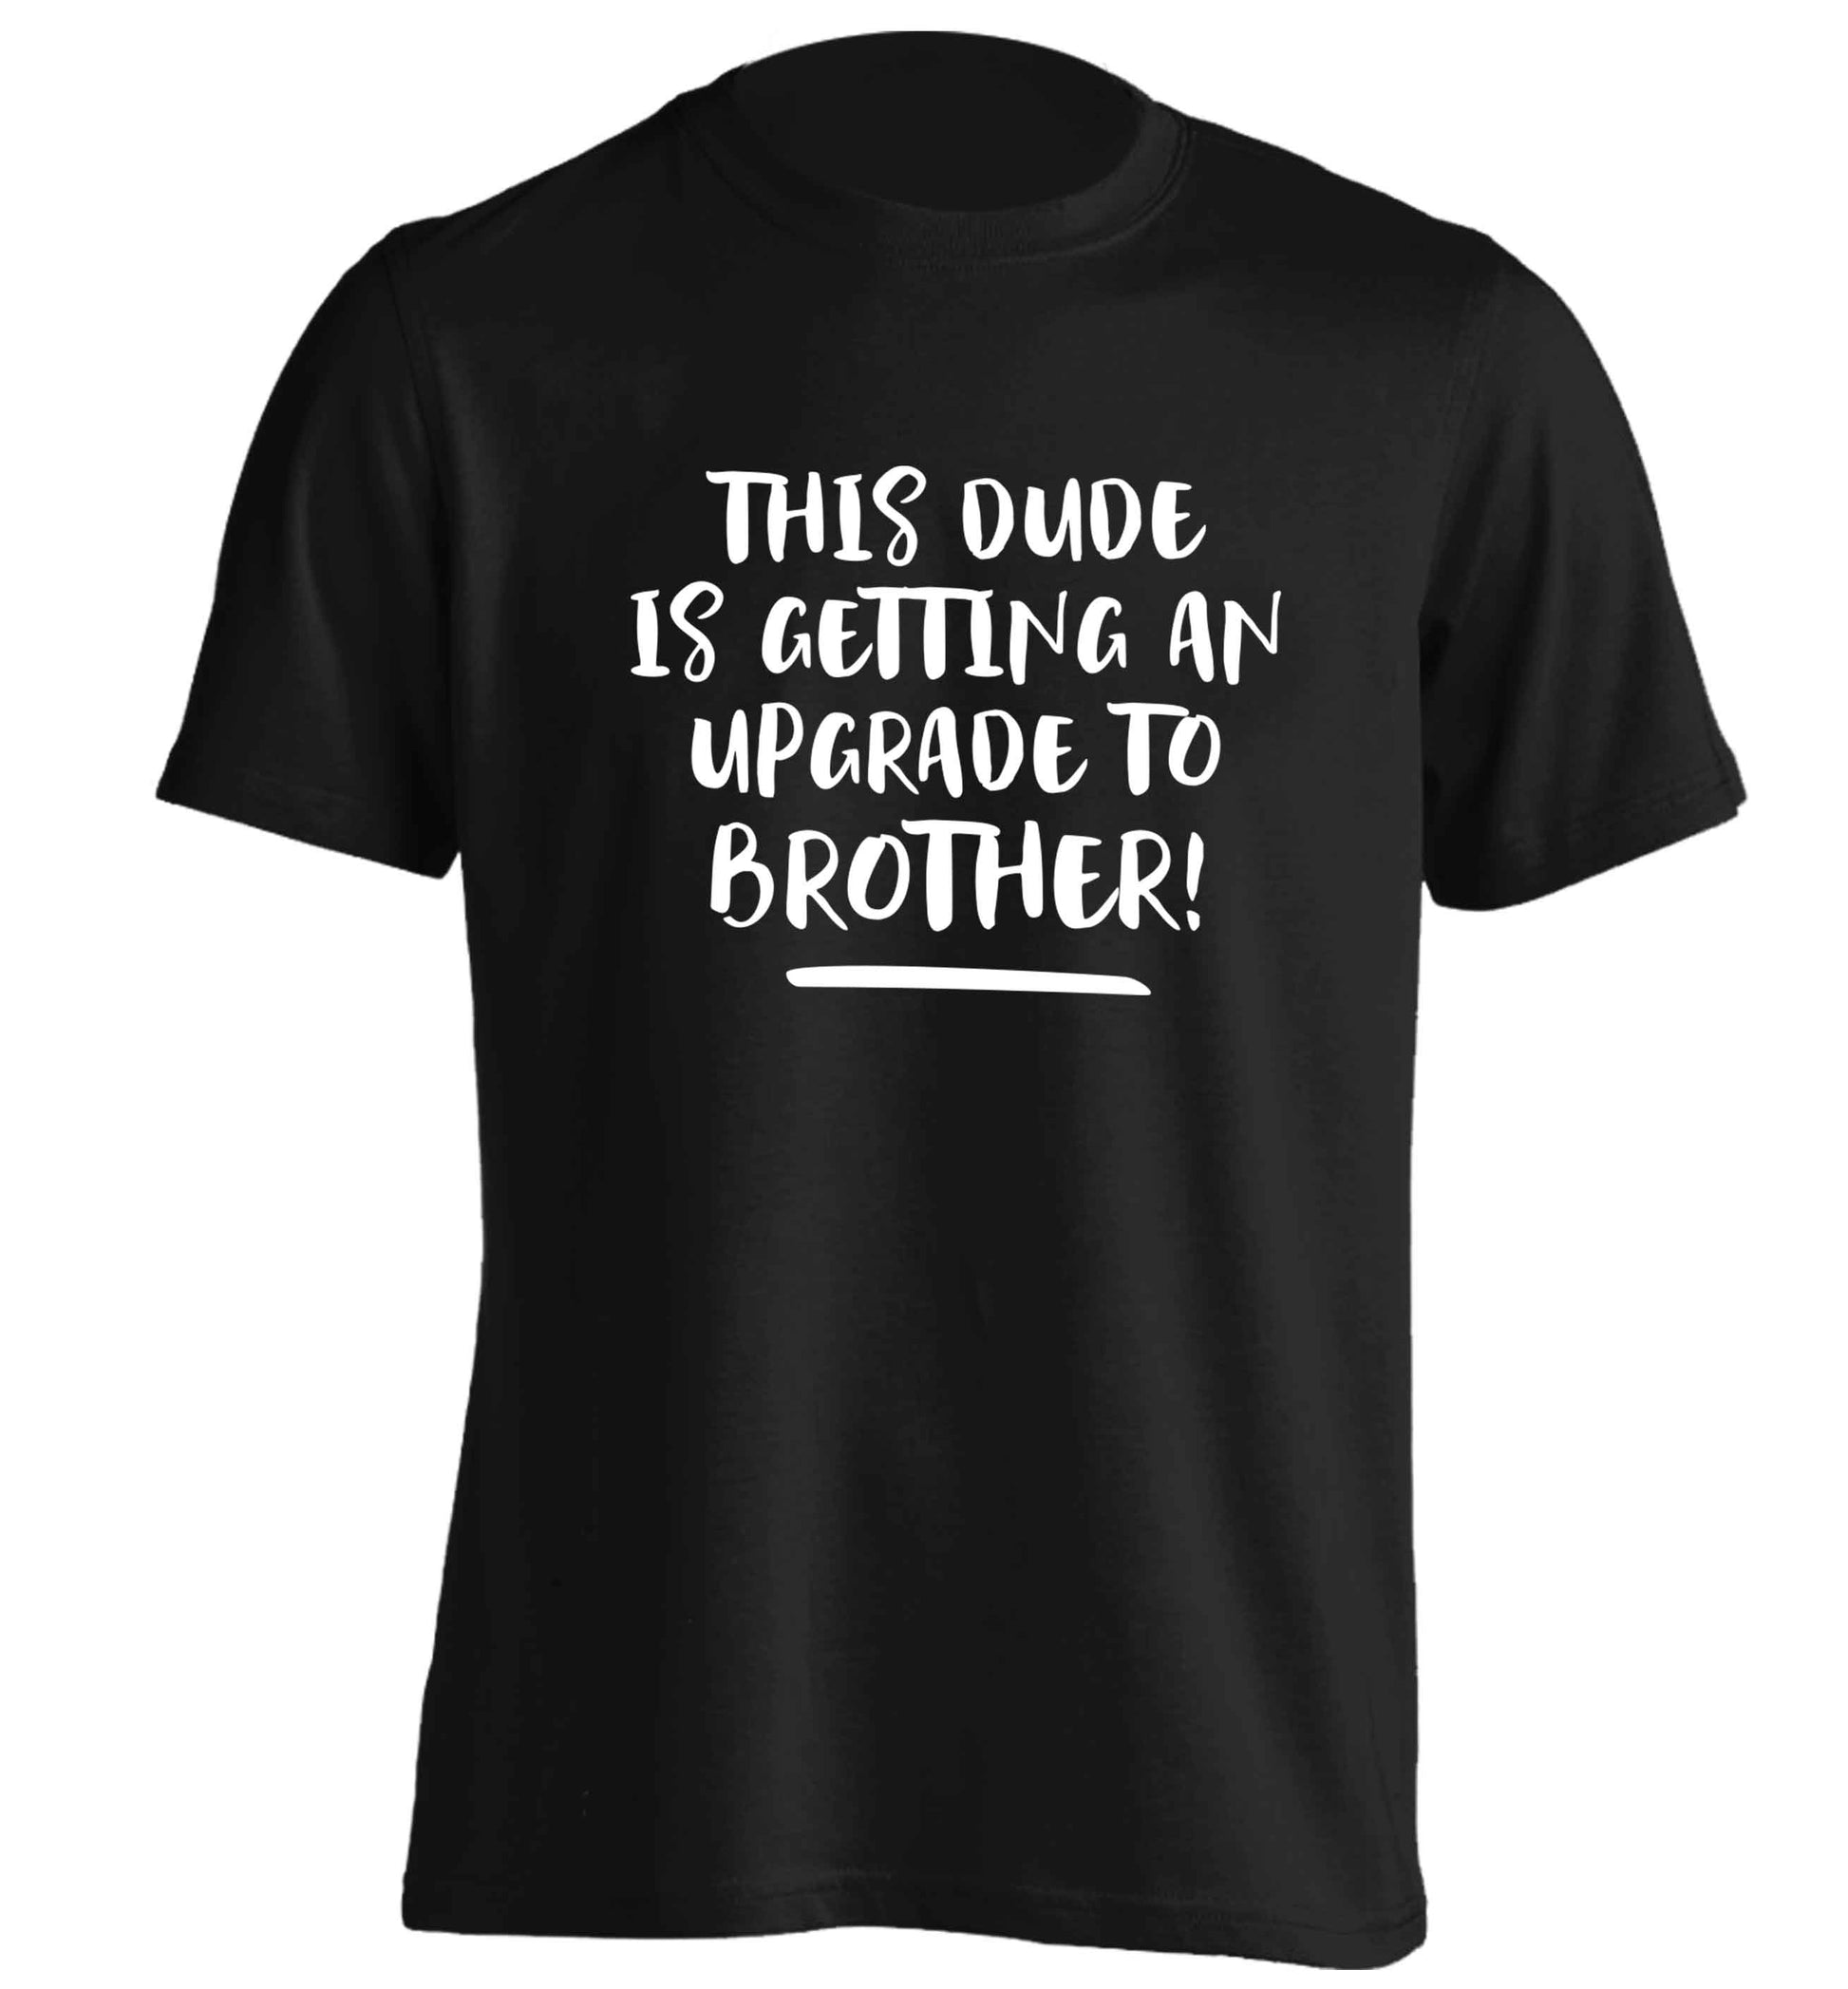 This dude is getting an upgrade to brother! adults unisex black Tshirt 2XL